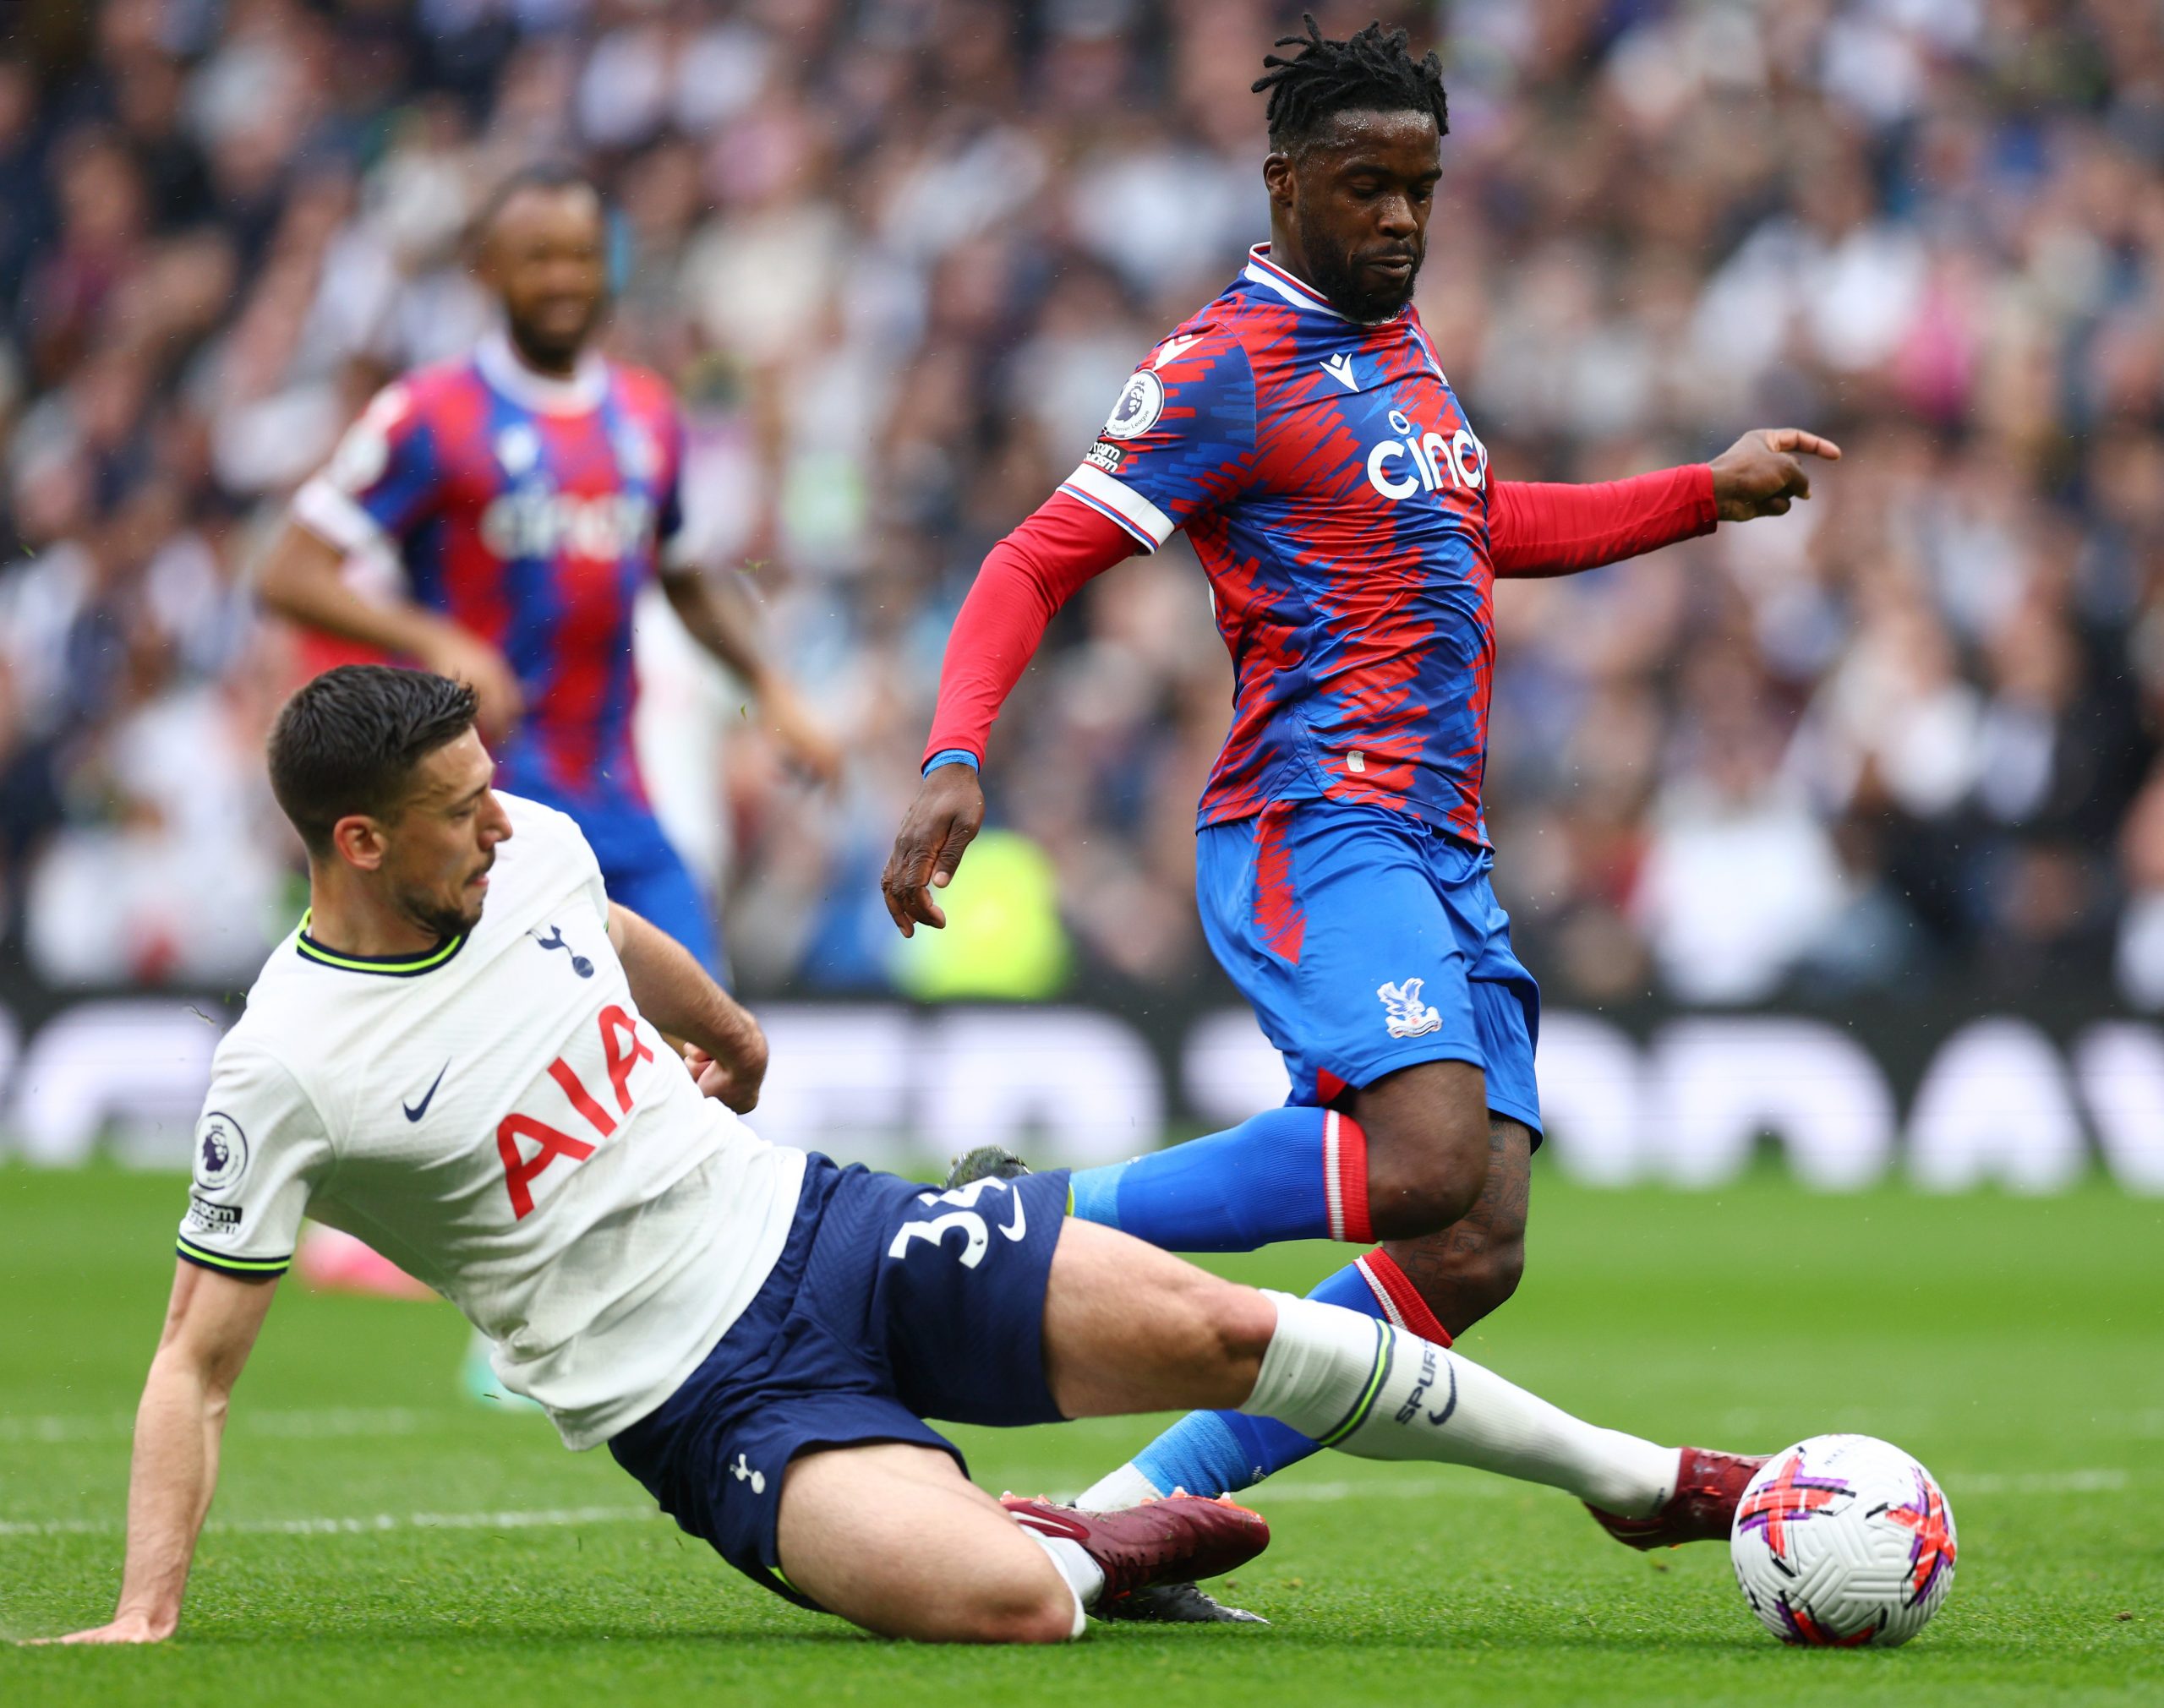 Maddison's backup or competition? Tottenham identify Eze as transfer target